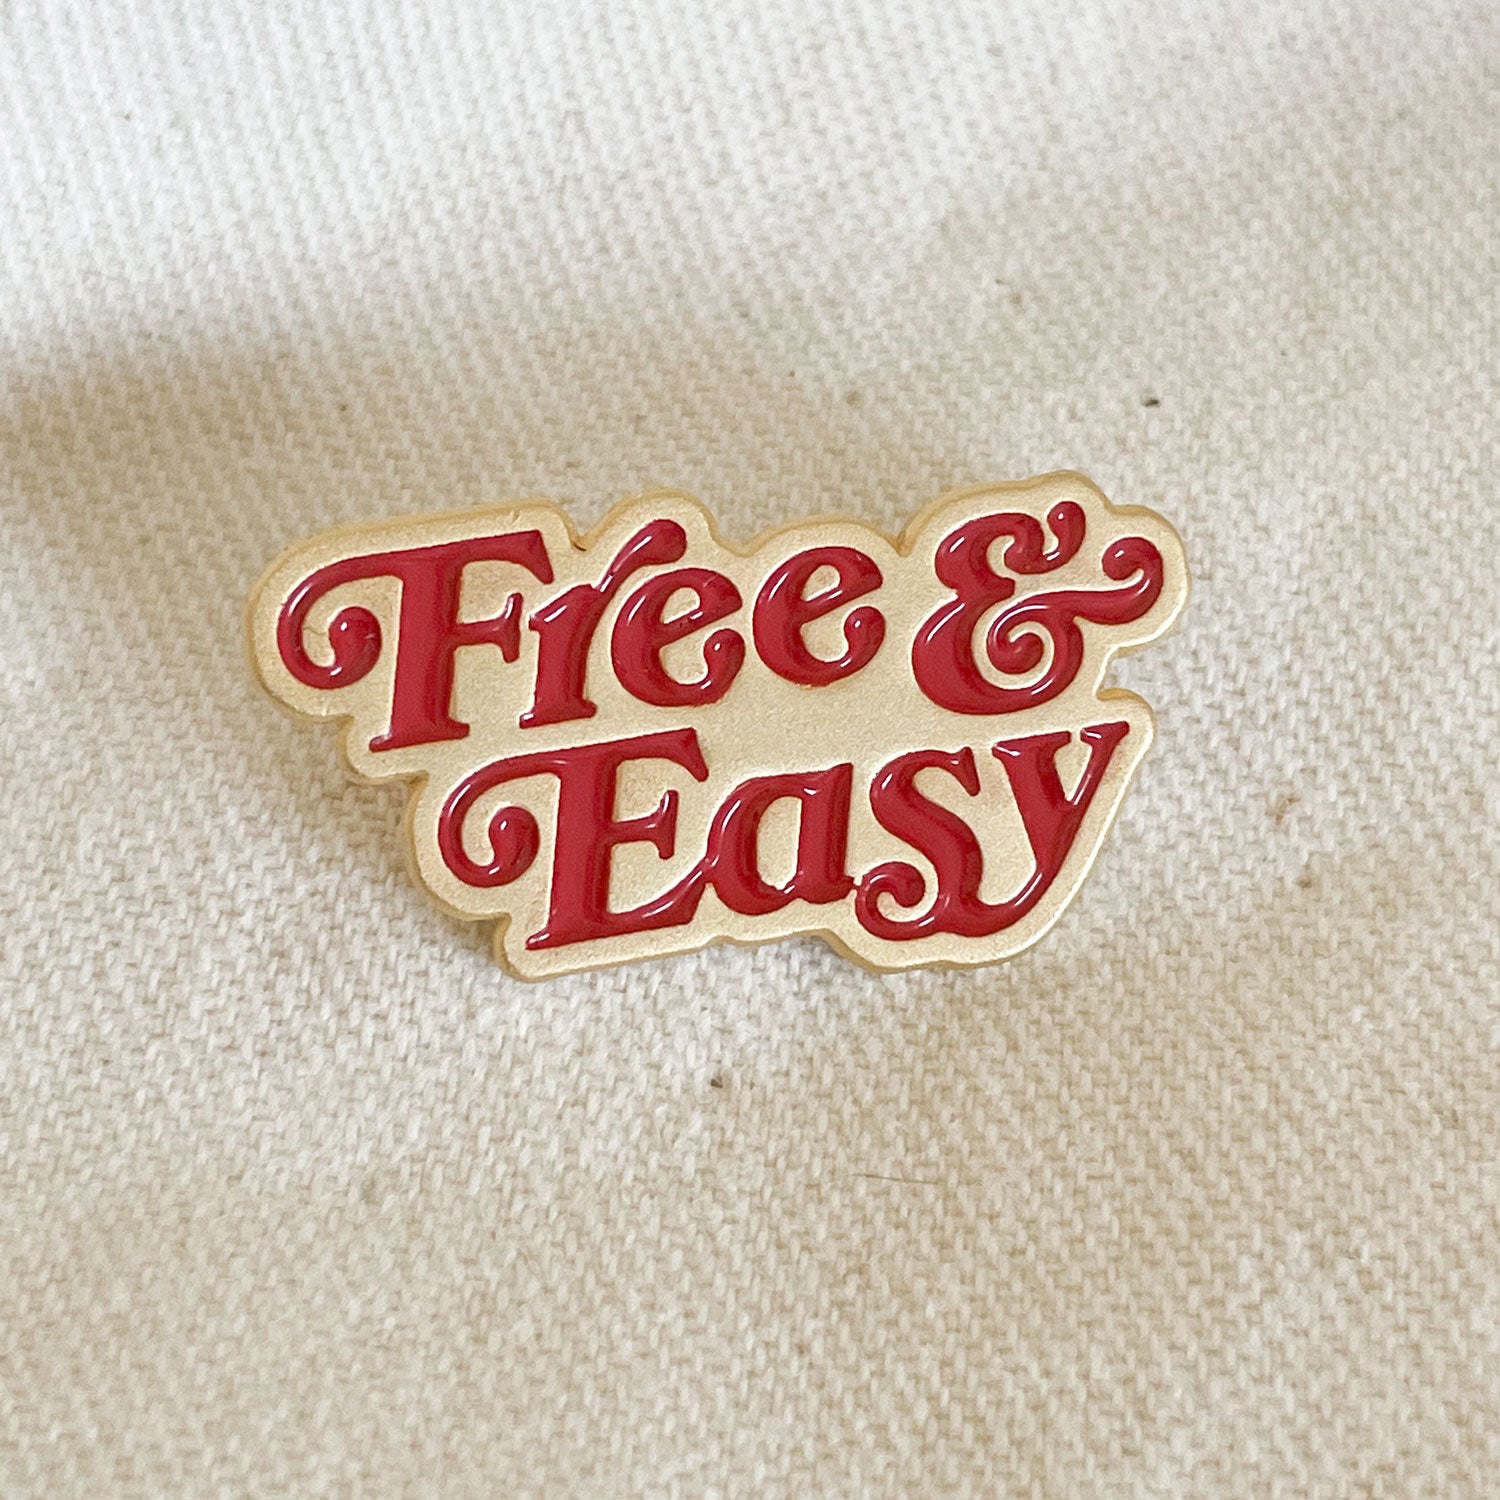 Free & Easy Enamel Pin in red and gold